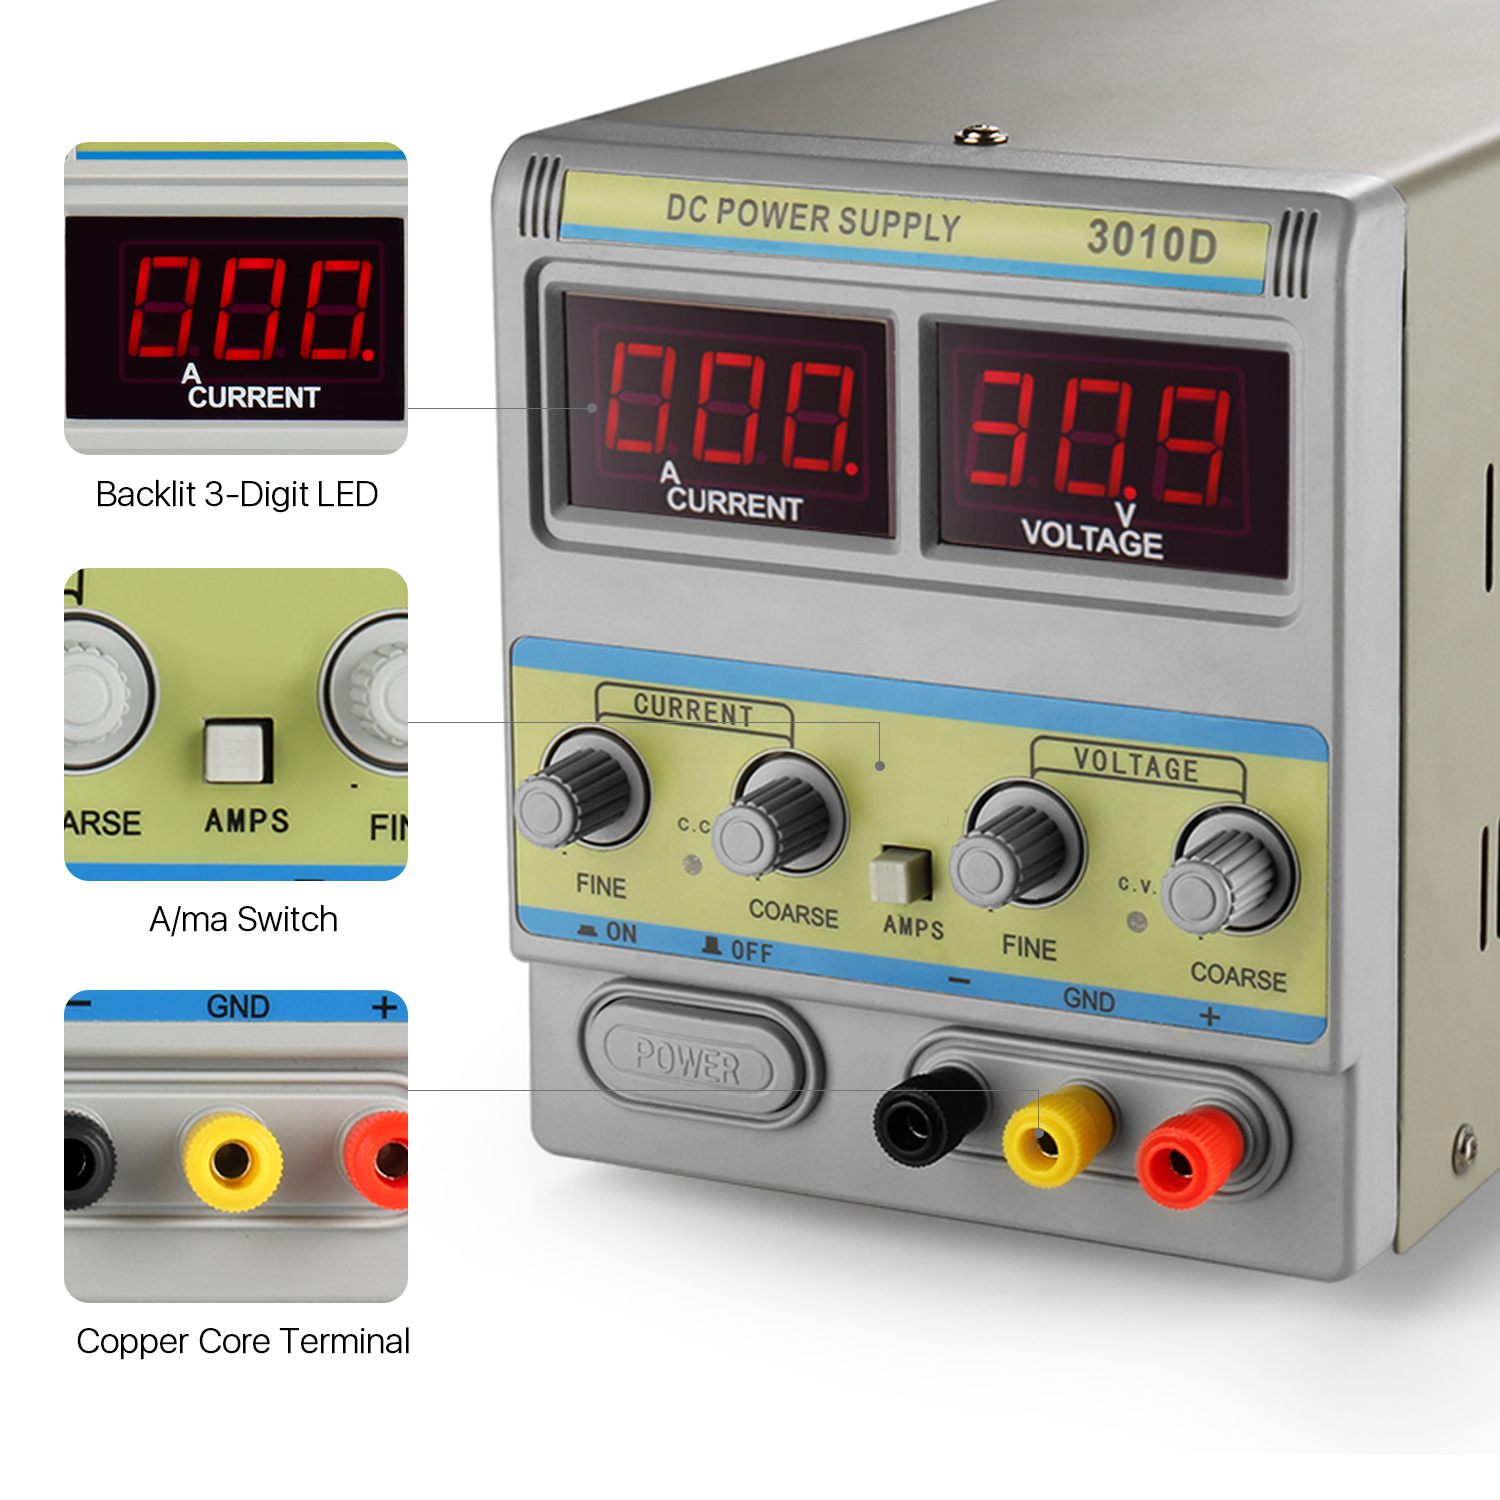 Premium Regulated Power Supply - Compact structure Benchtop Power Supply design; All metal construction; Dual back lit LED displays